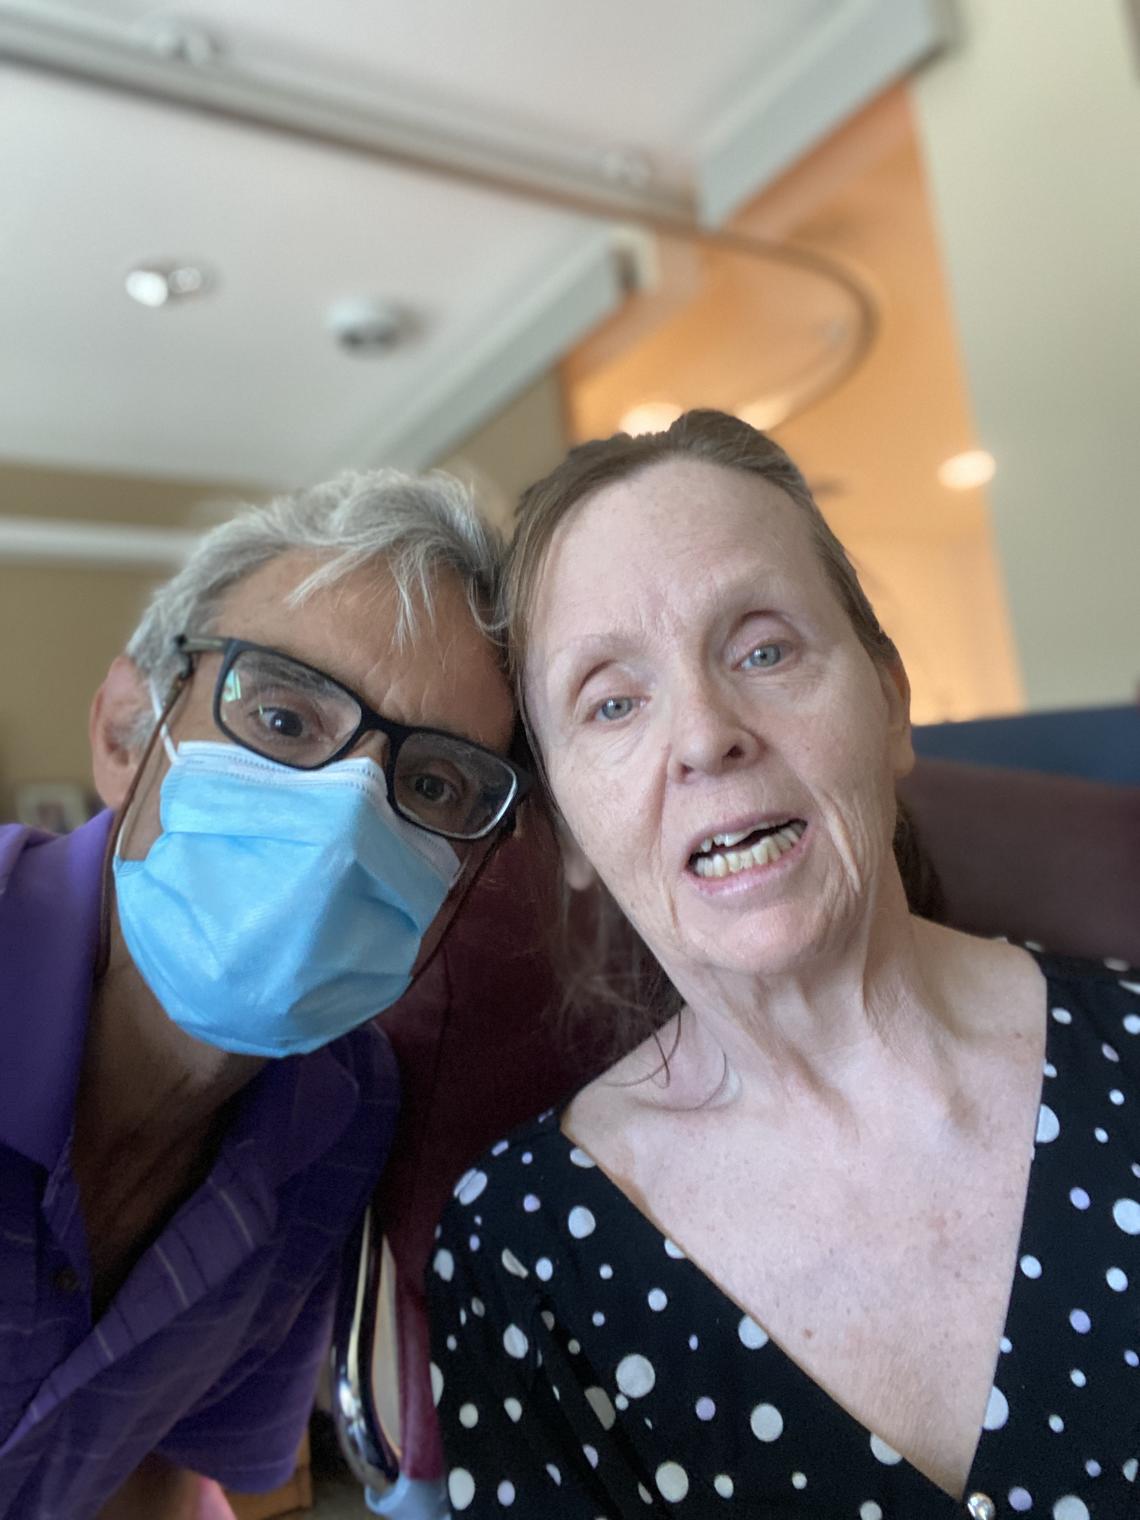 Daniel, wearing a face mask, poses next to his wife Janet who lives in a long term care facility